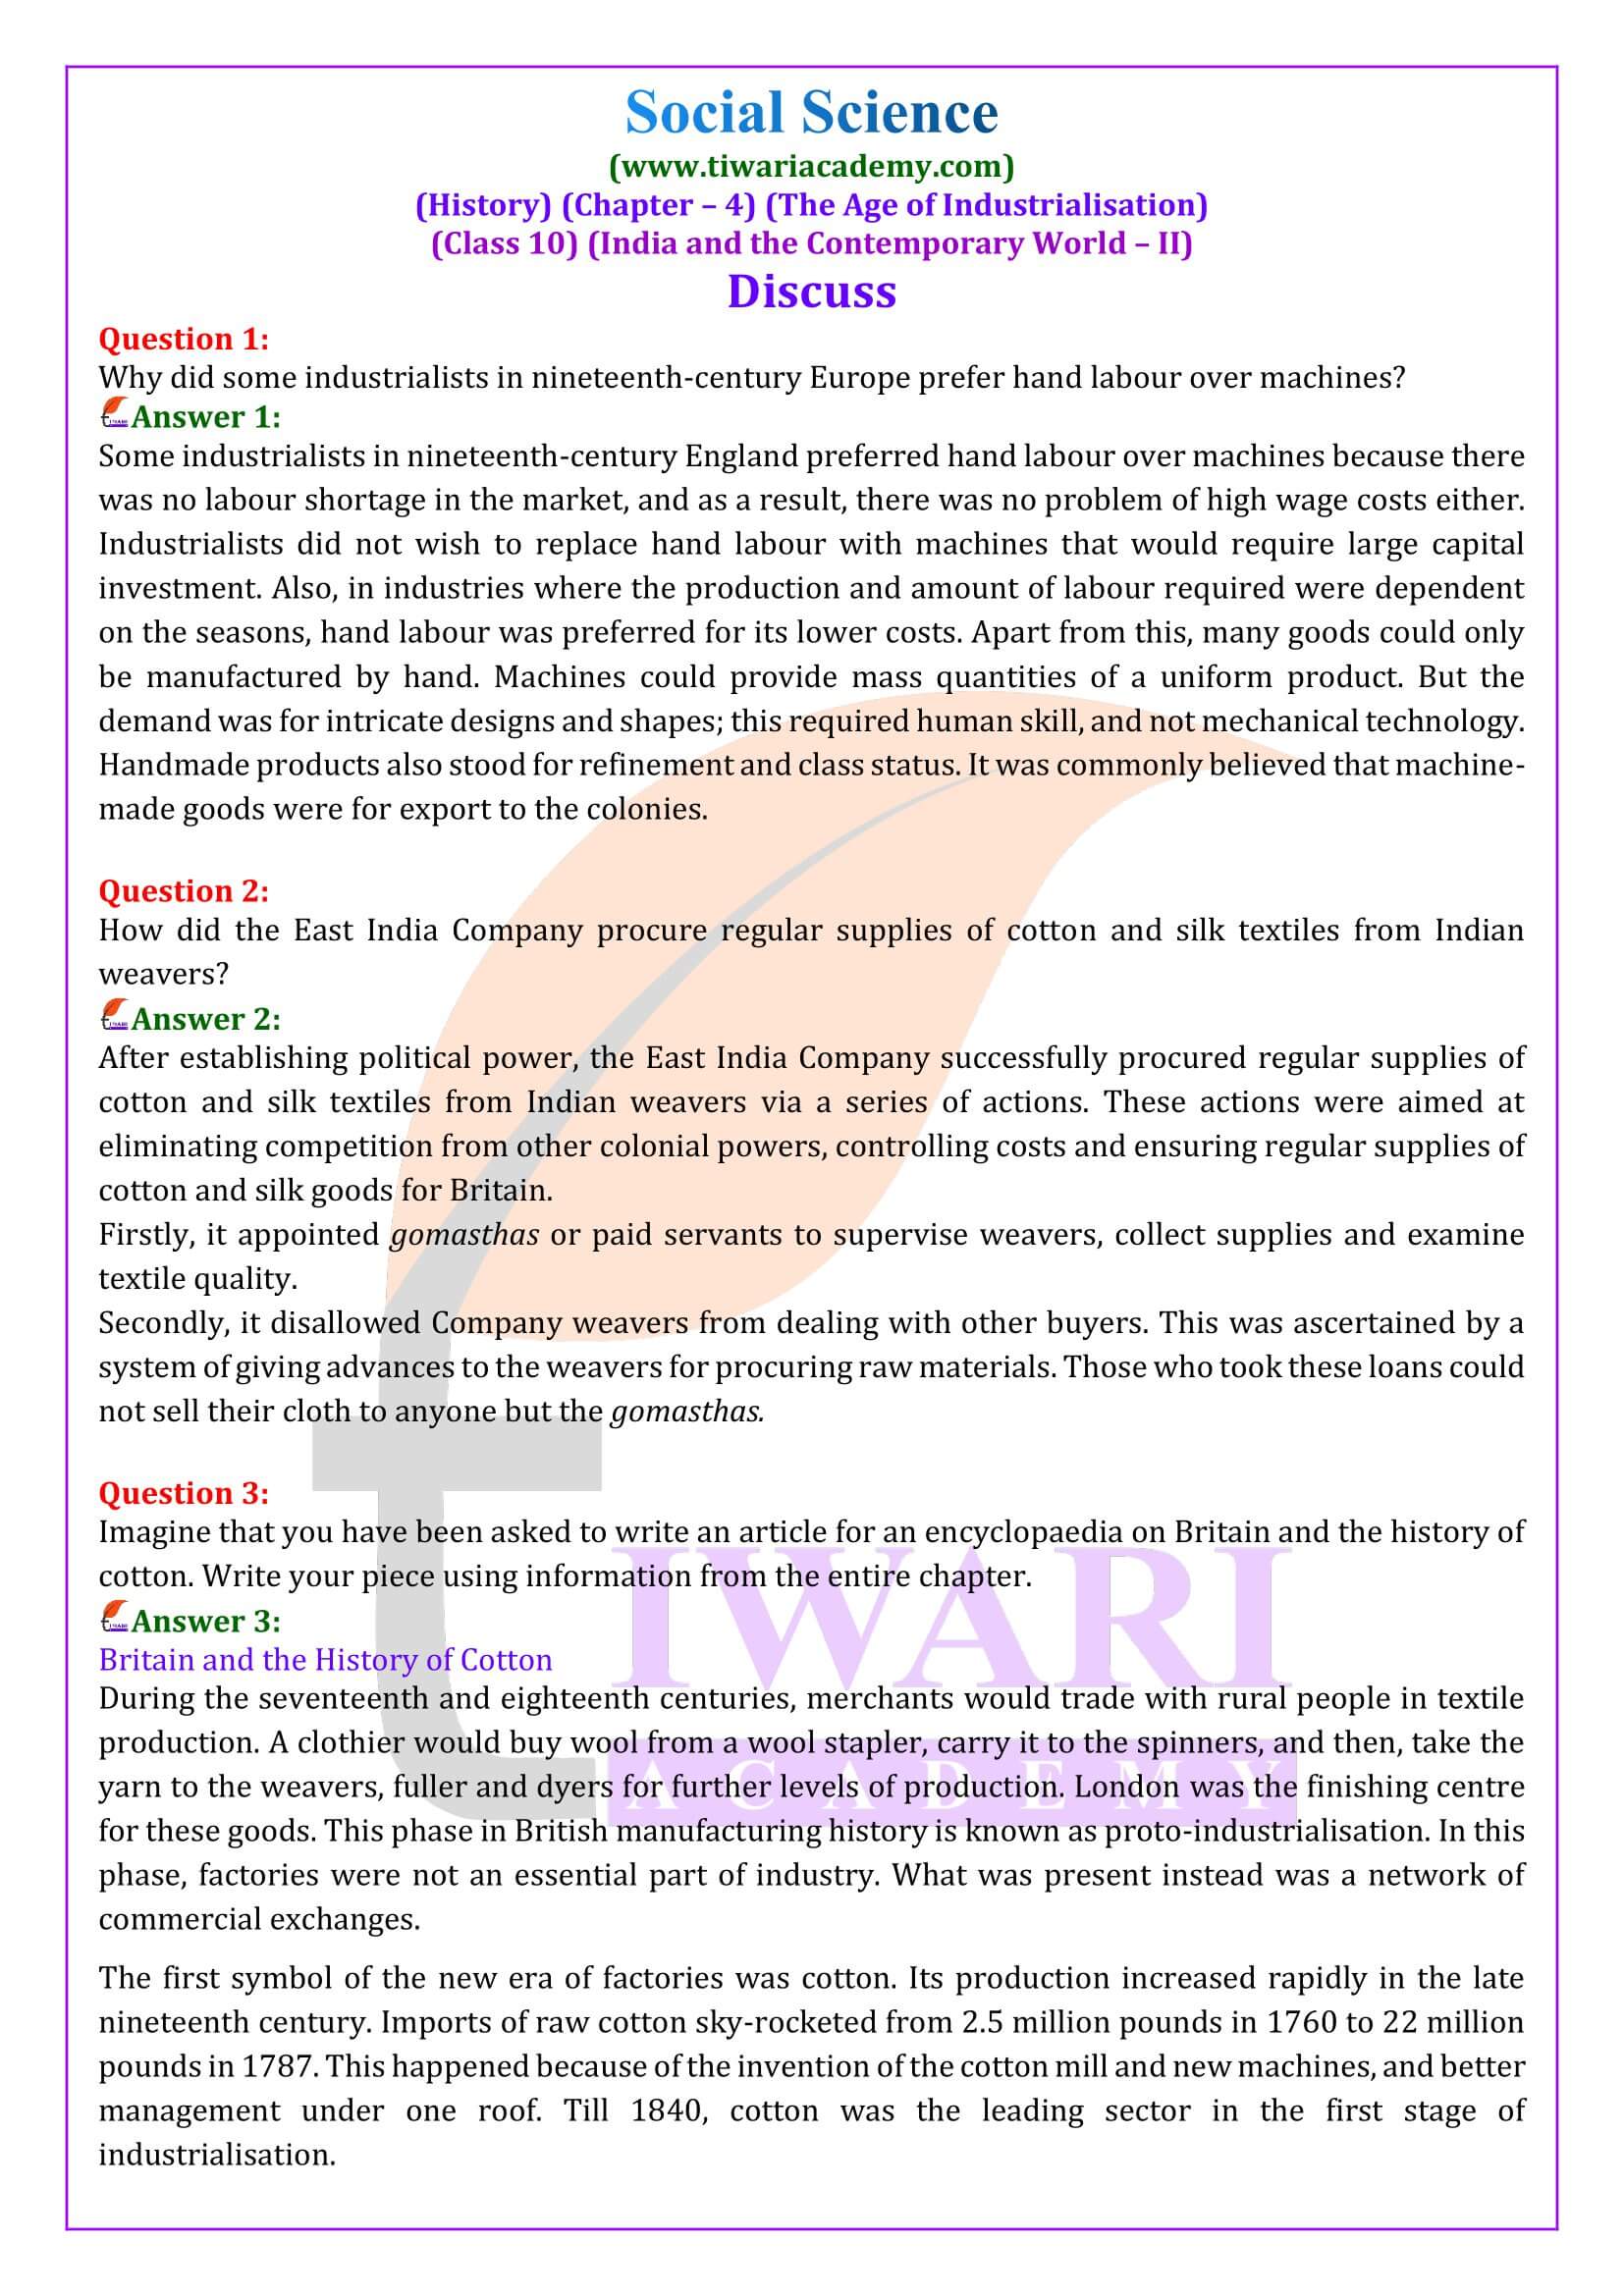 NCERT Solutions for Class 10 History Chapter 4